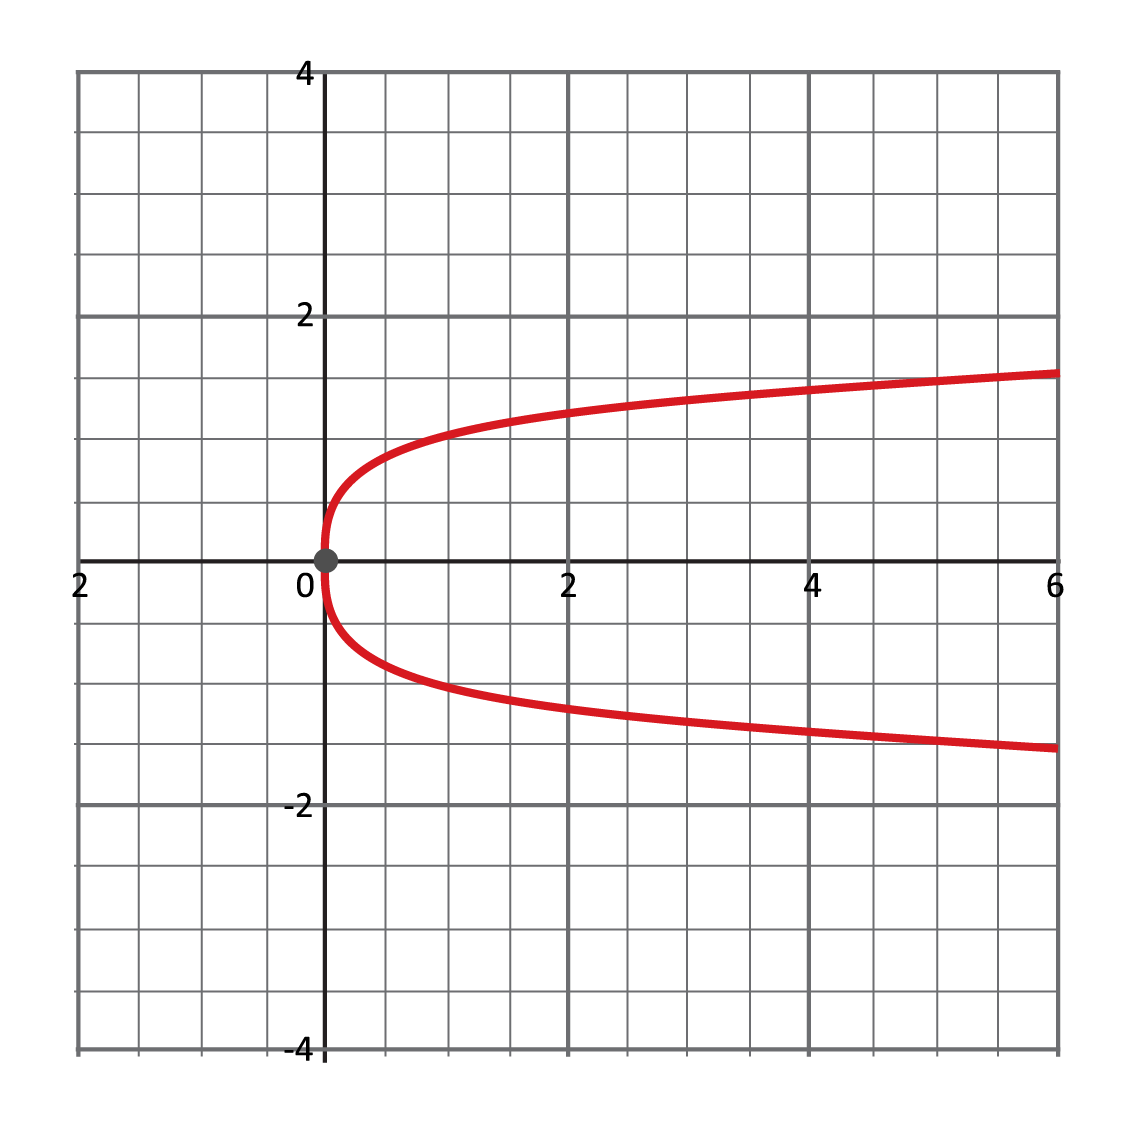 graph, red sideways parabola, vertex at (0, 0), opens to the right